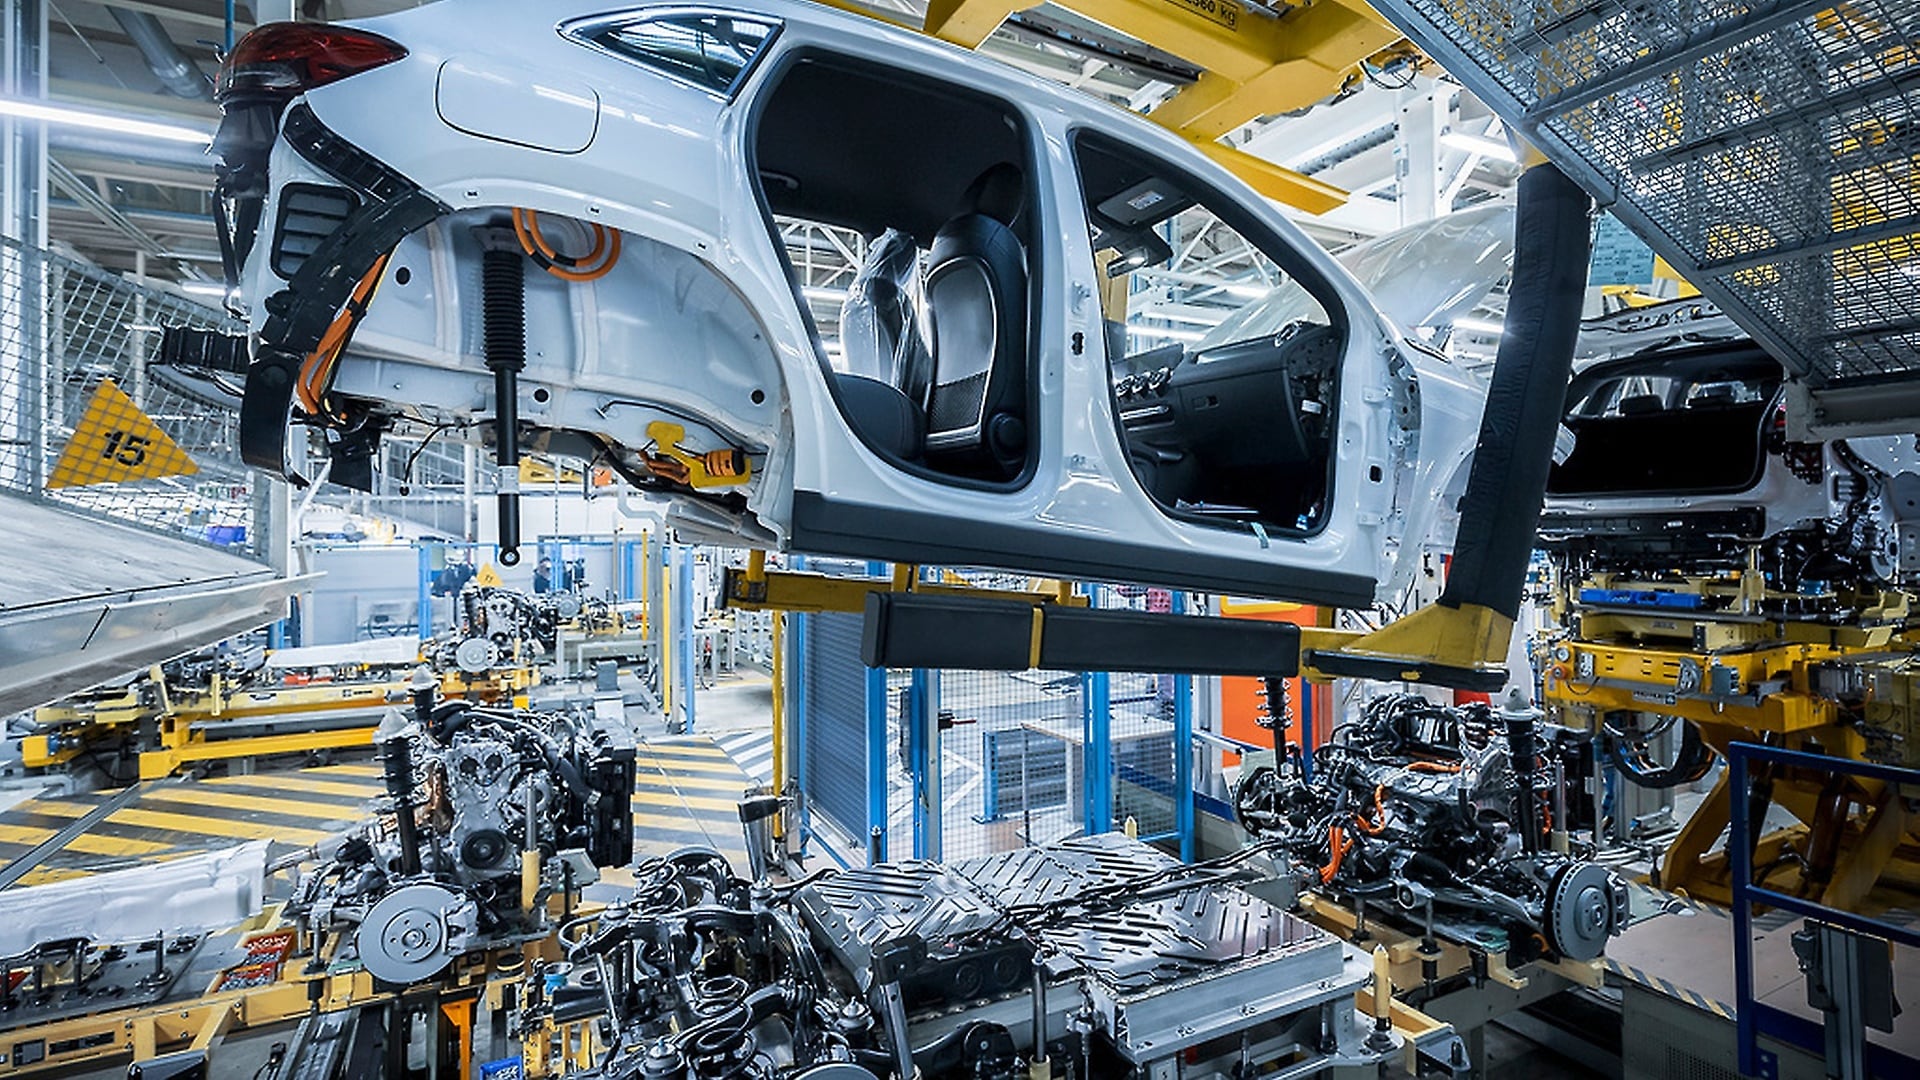 A glimpse into production at the Mercedes-Benz plant Rastatt.